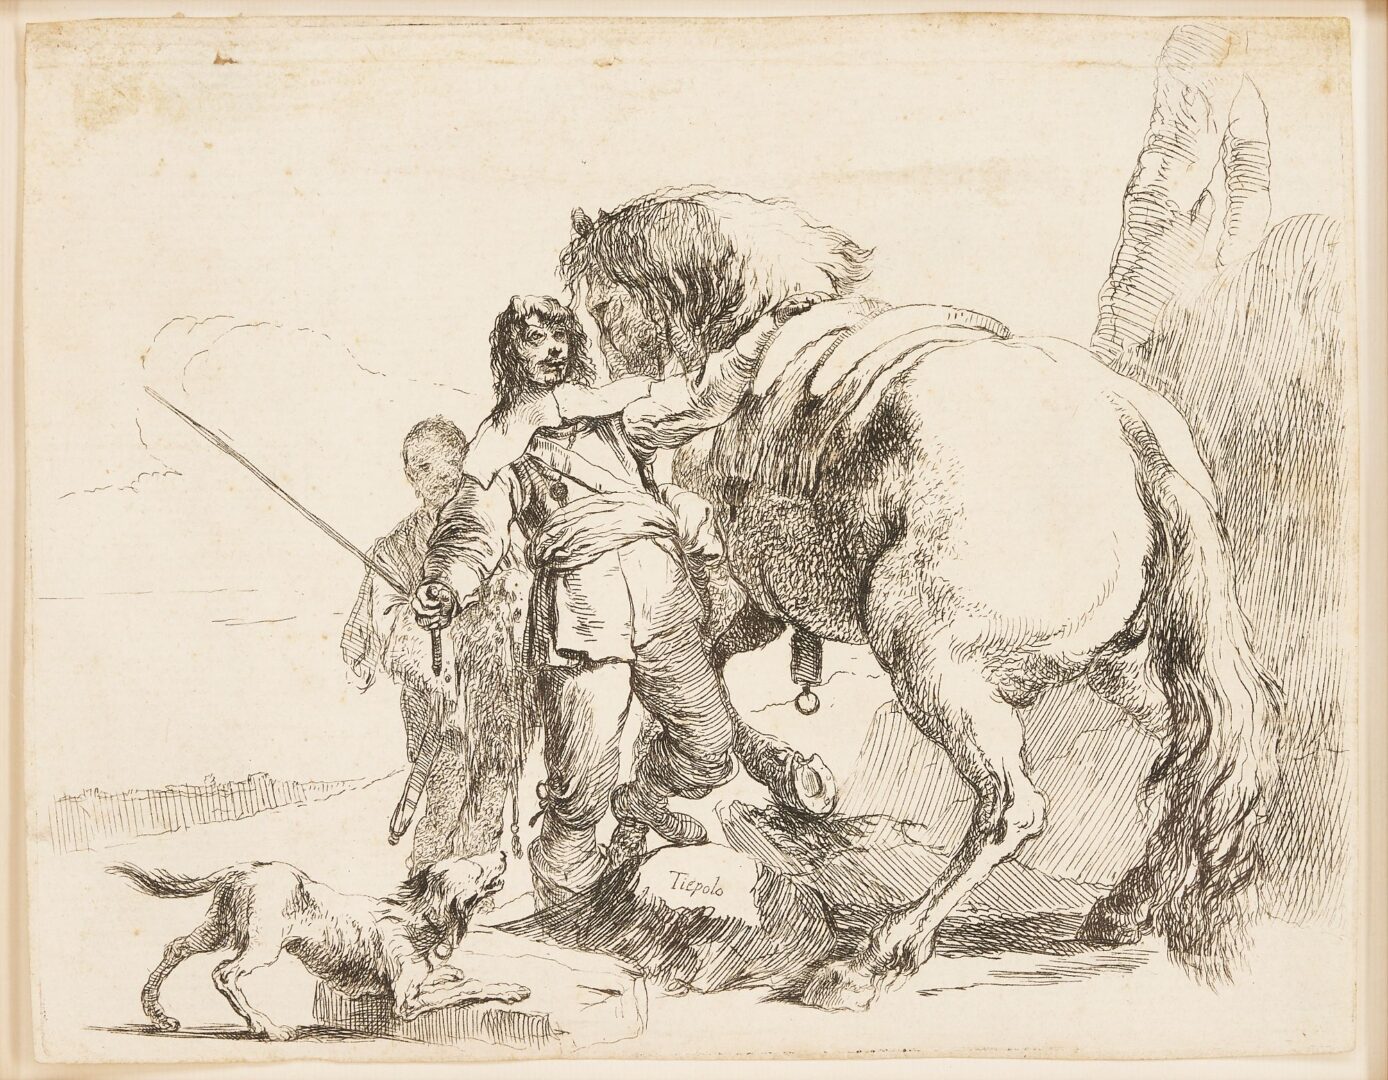 Lot 900: Giovanni Battista Tiepolo Etching, Cavalier with His Horse